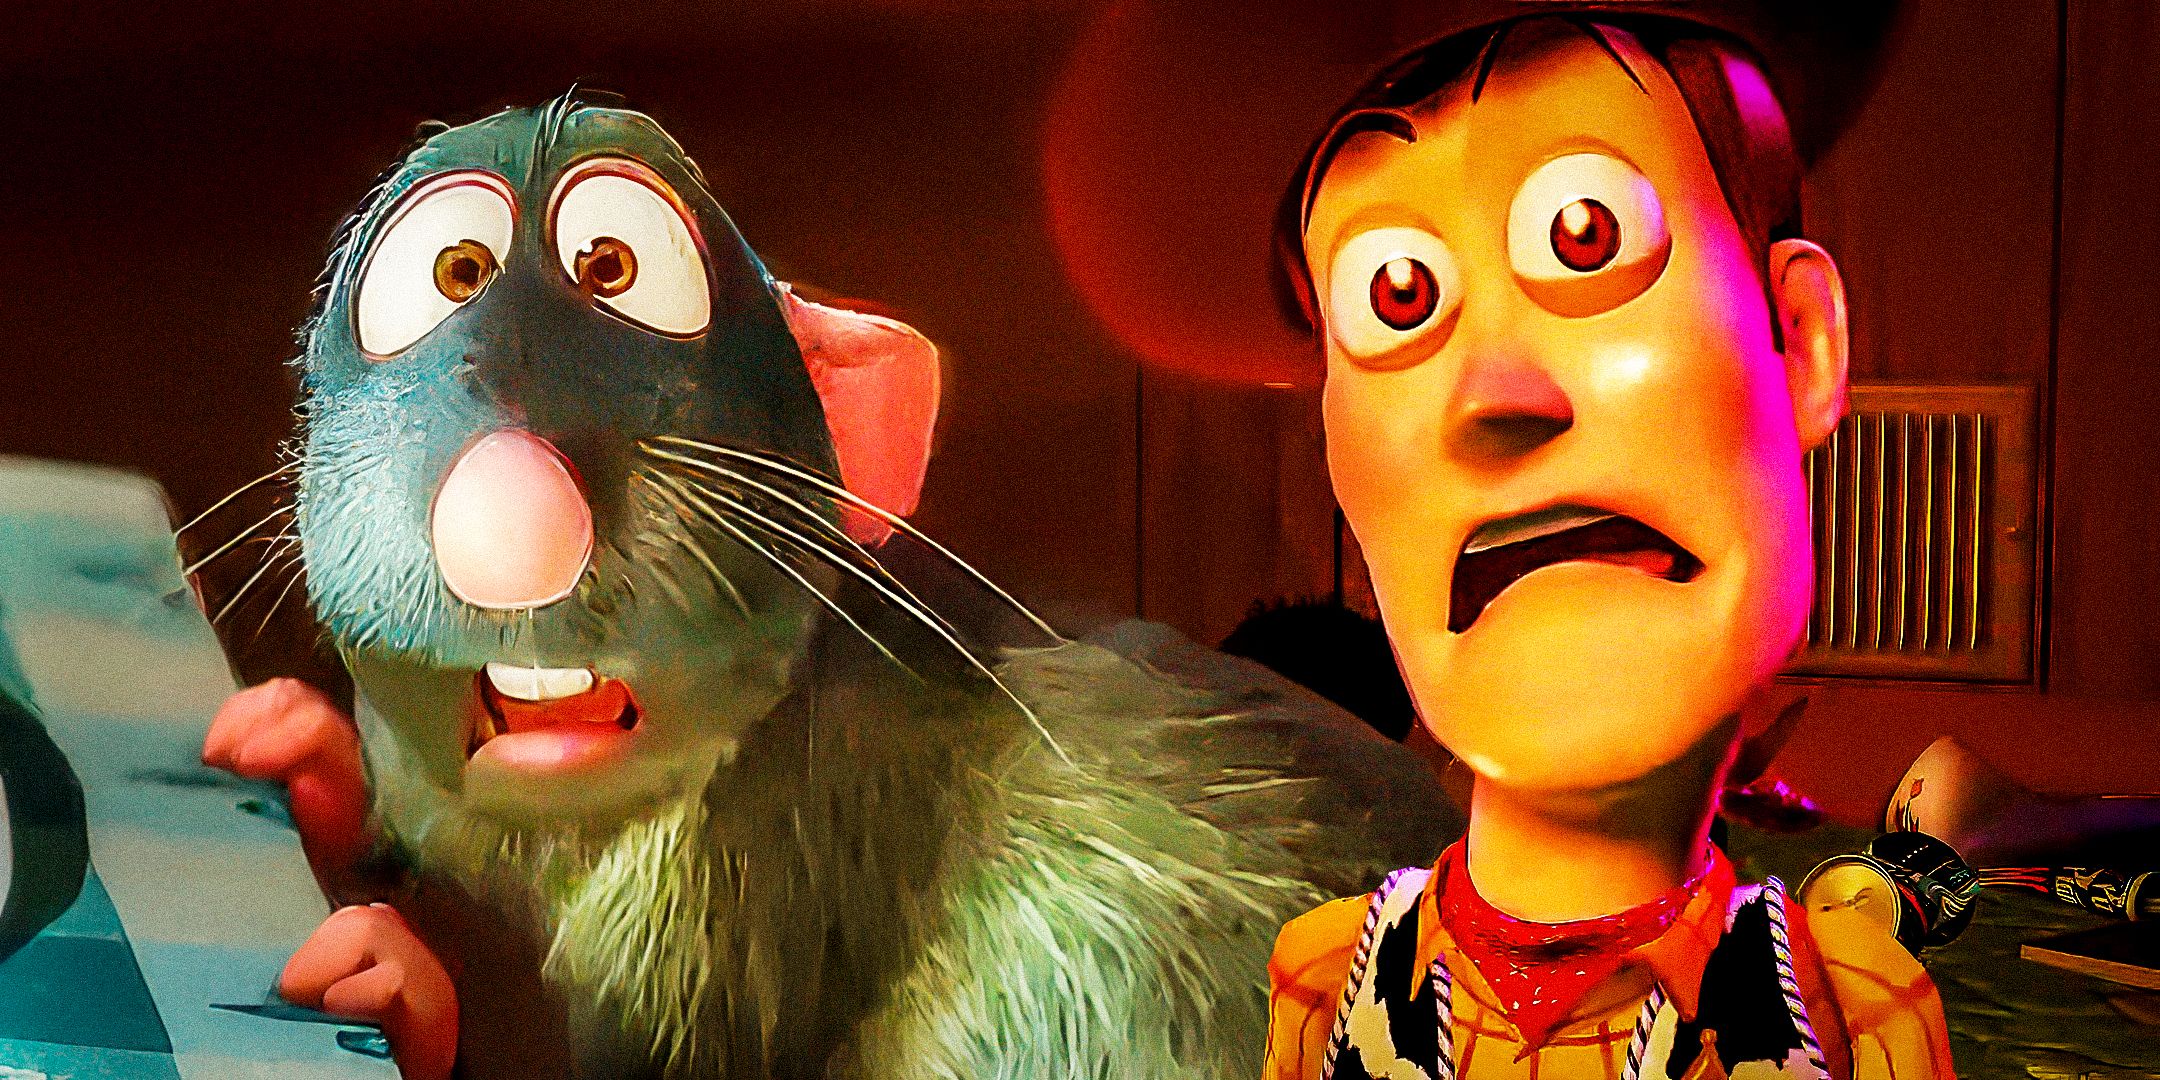 Remy-from-Ratatouille-and-Woody-from-Toy-Story